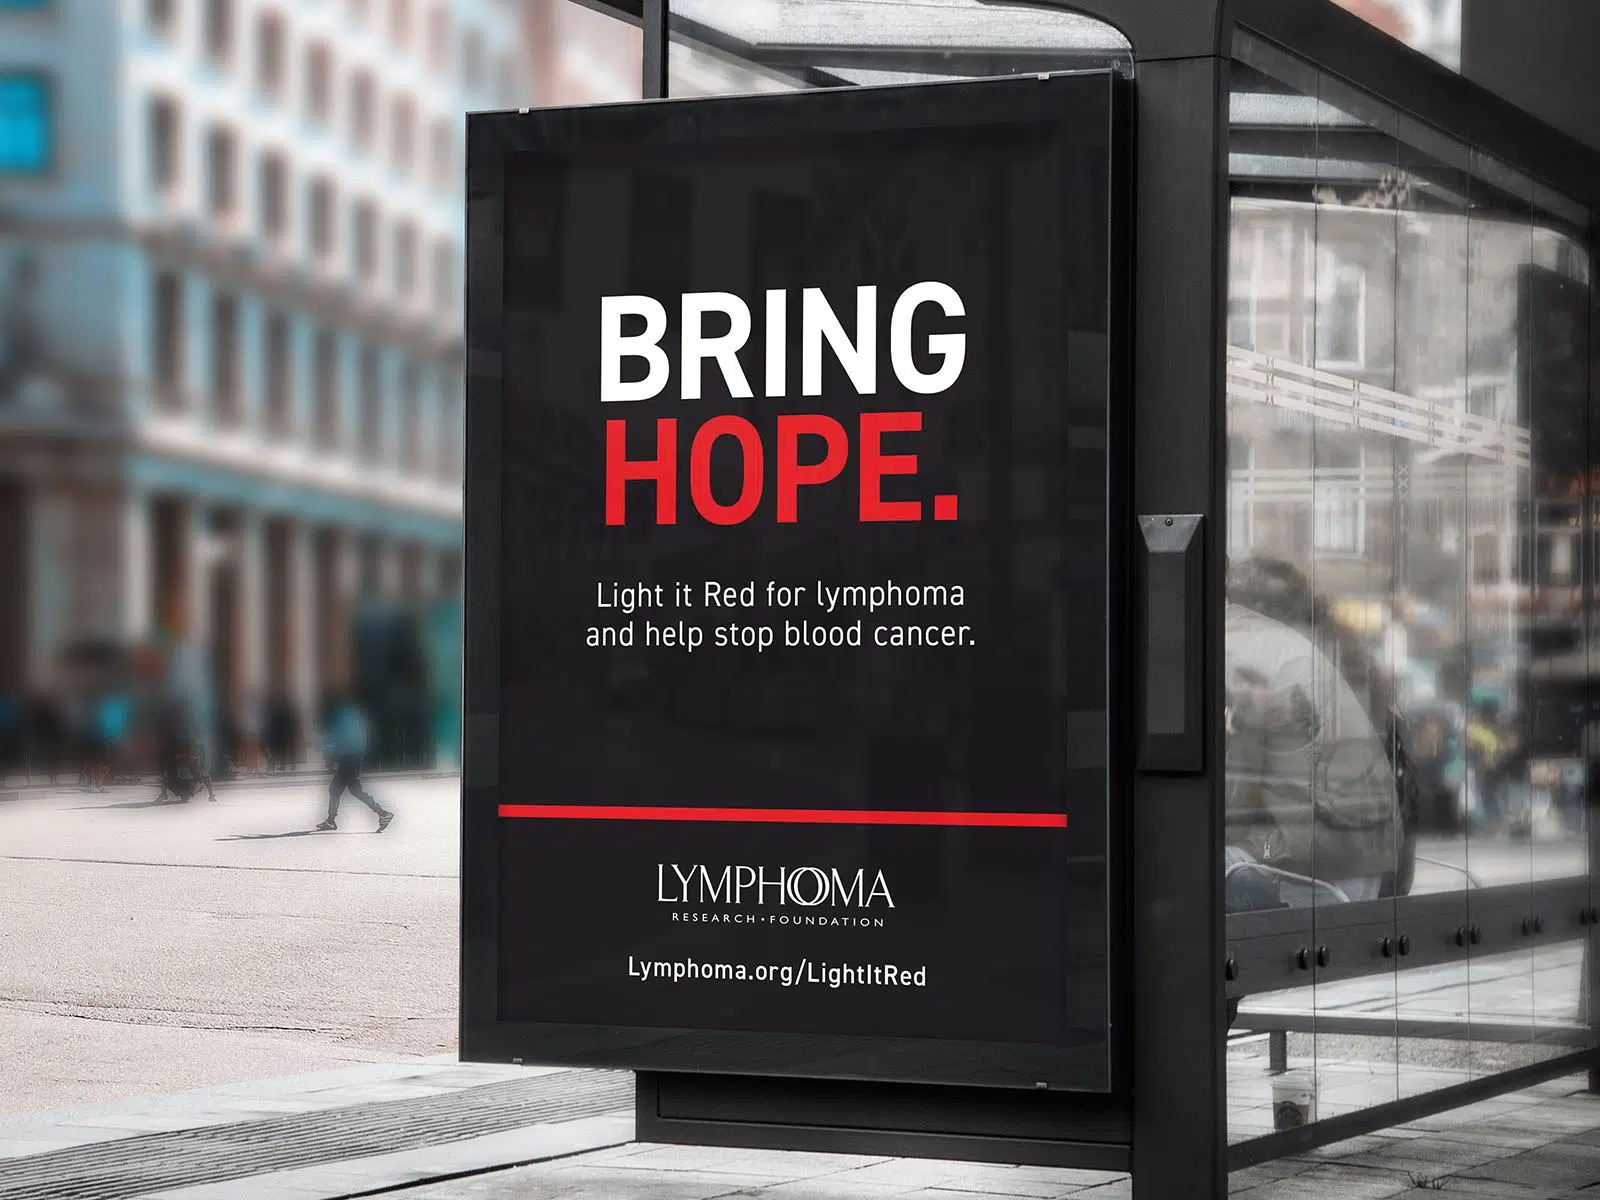 Outdoor Advertising - Bus Shelter Poster Design for Lymphoma Research Foundation